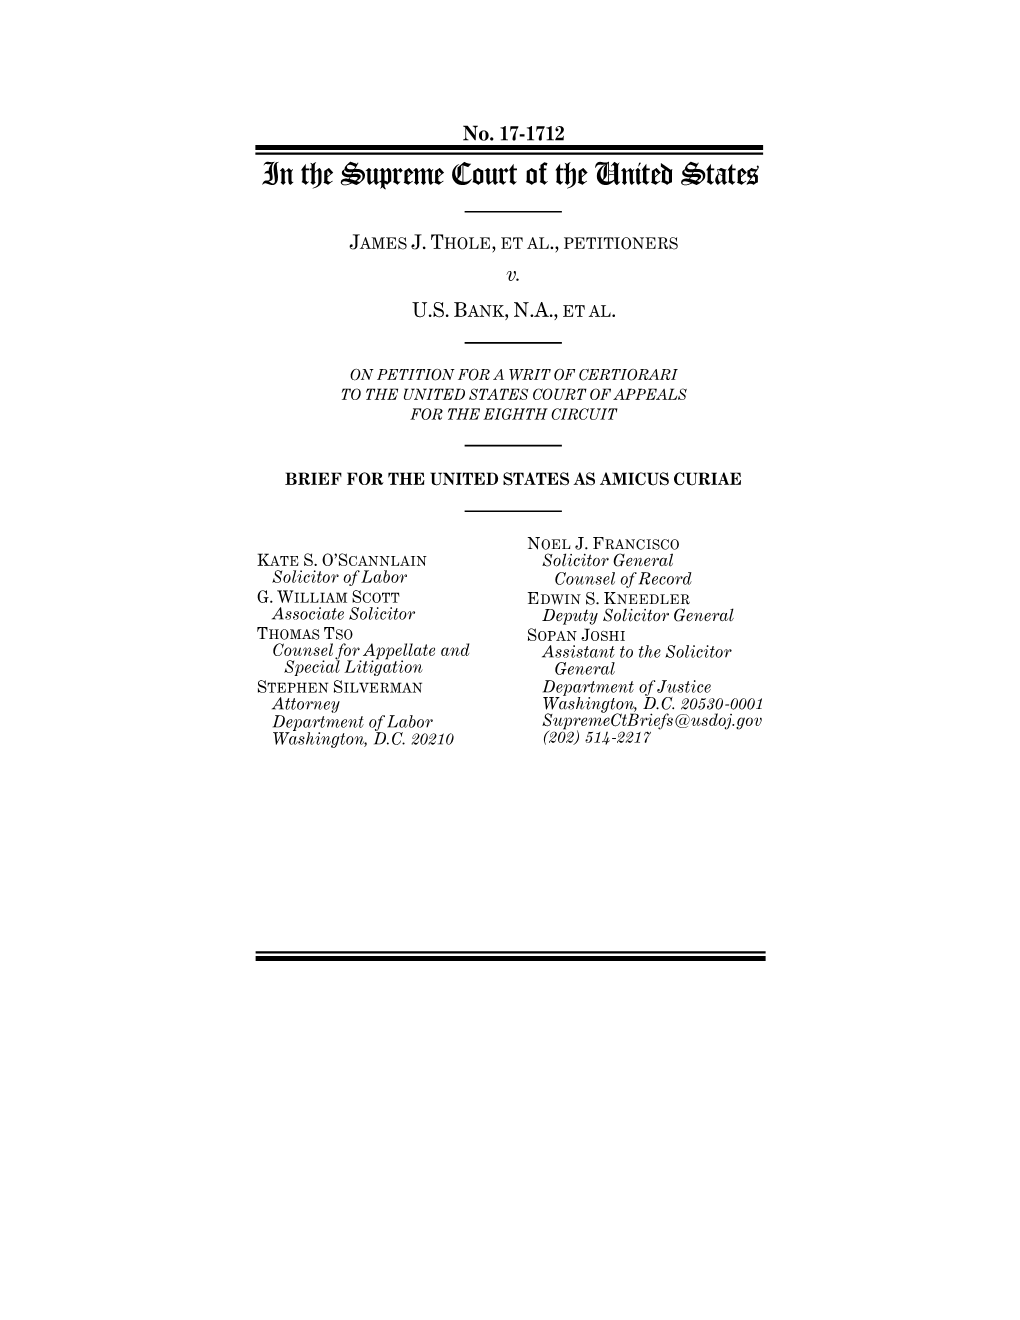 Brief for the United States As Amicus Curiae